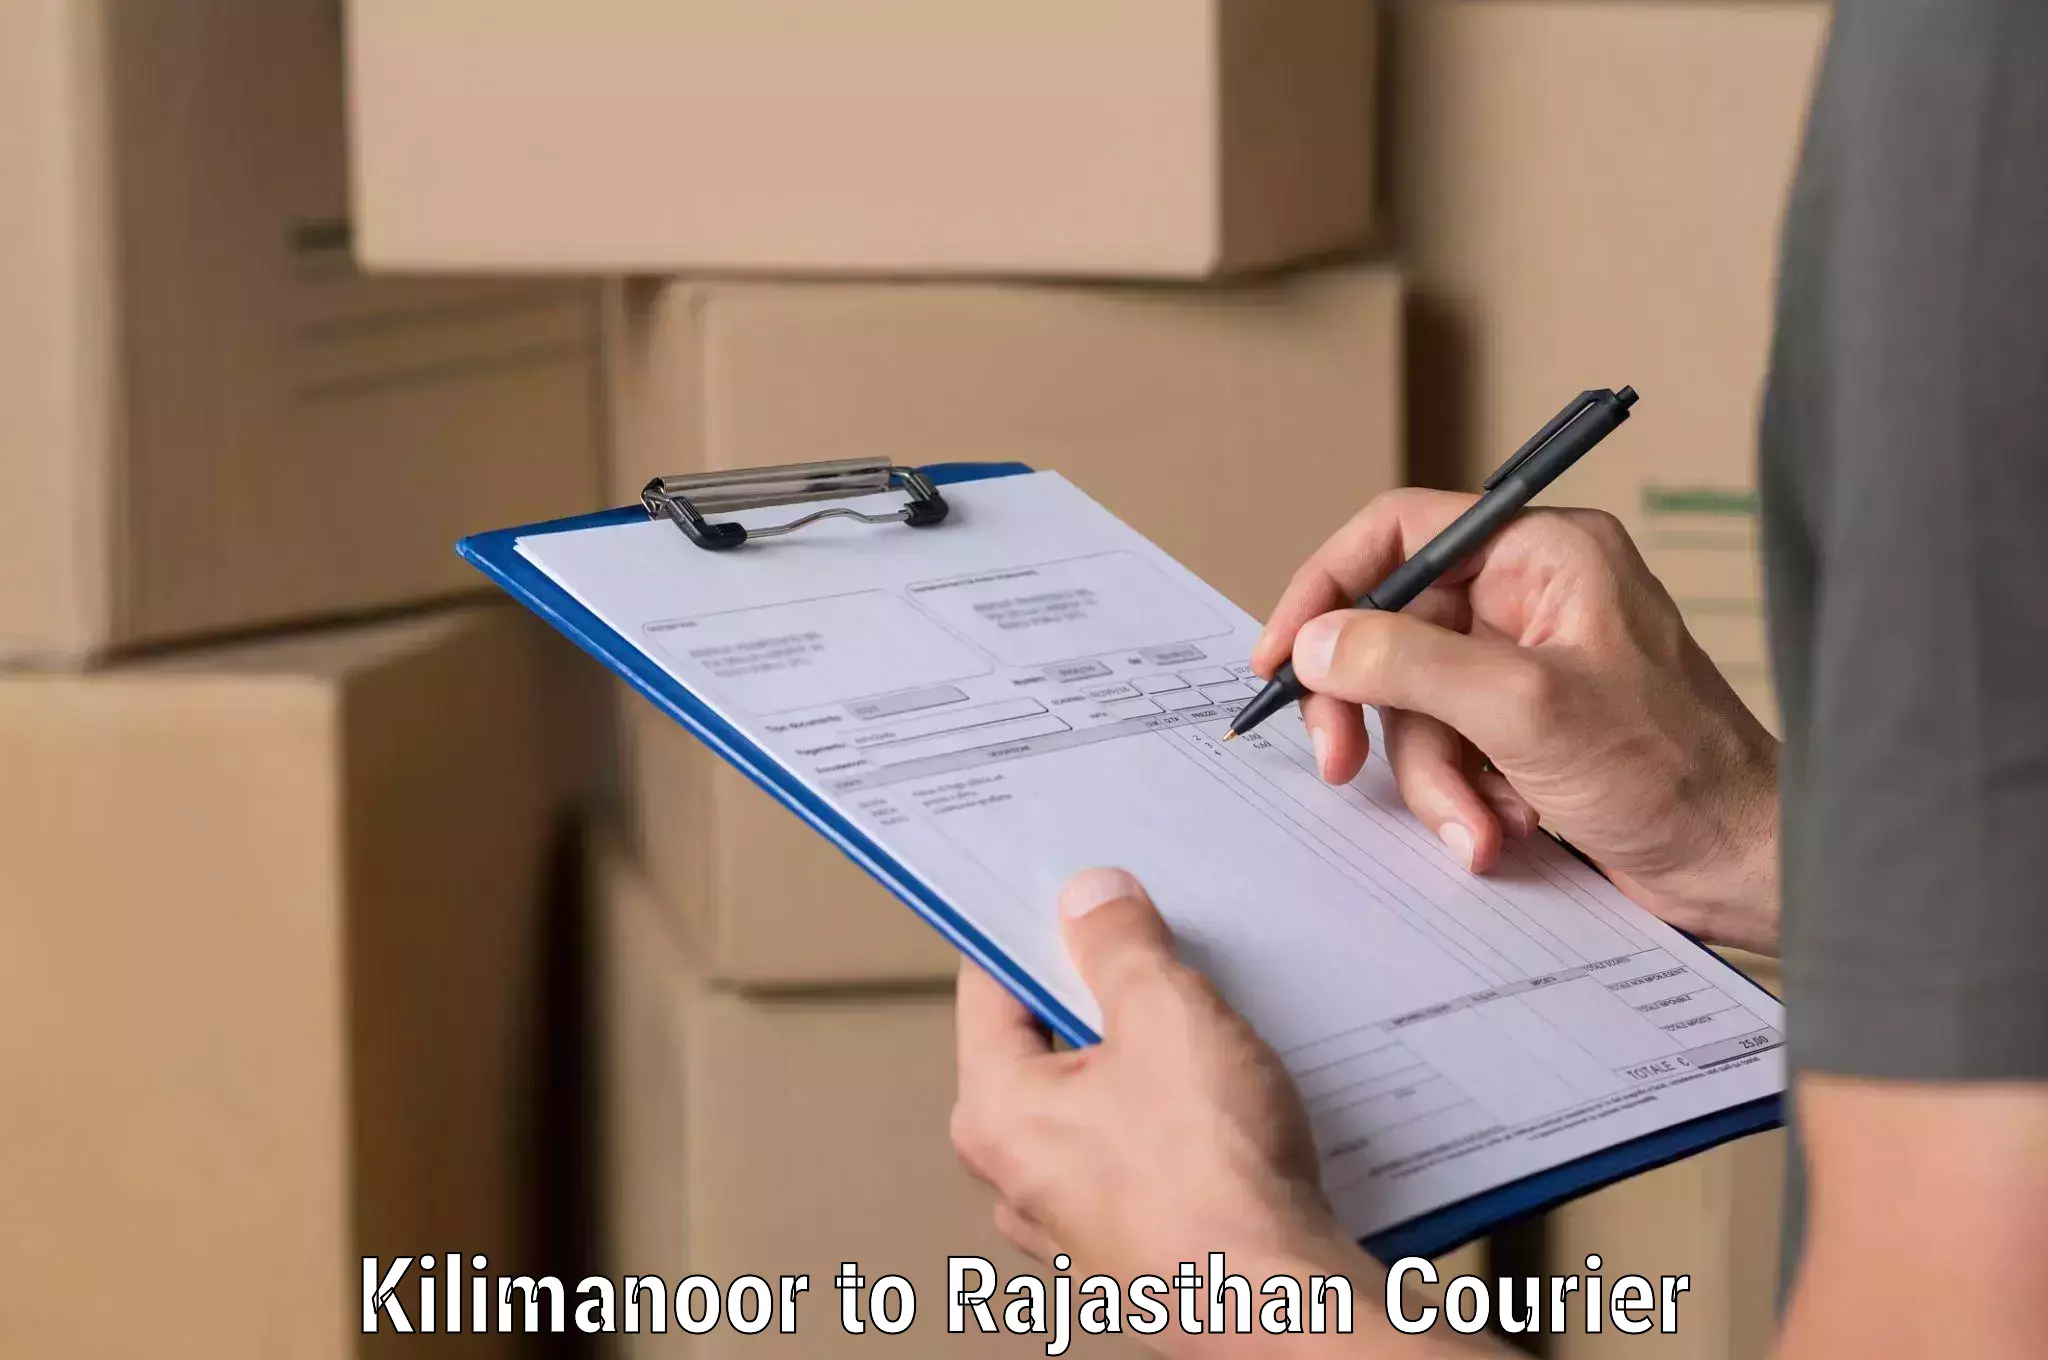 Global shipping networks Kilimanoor to Beawar